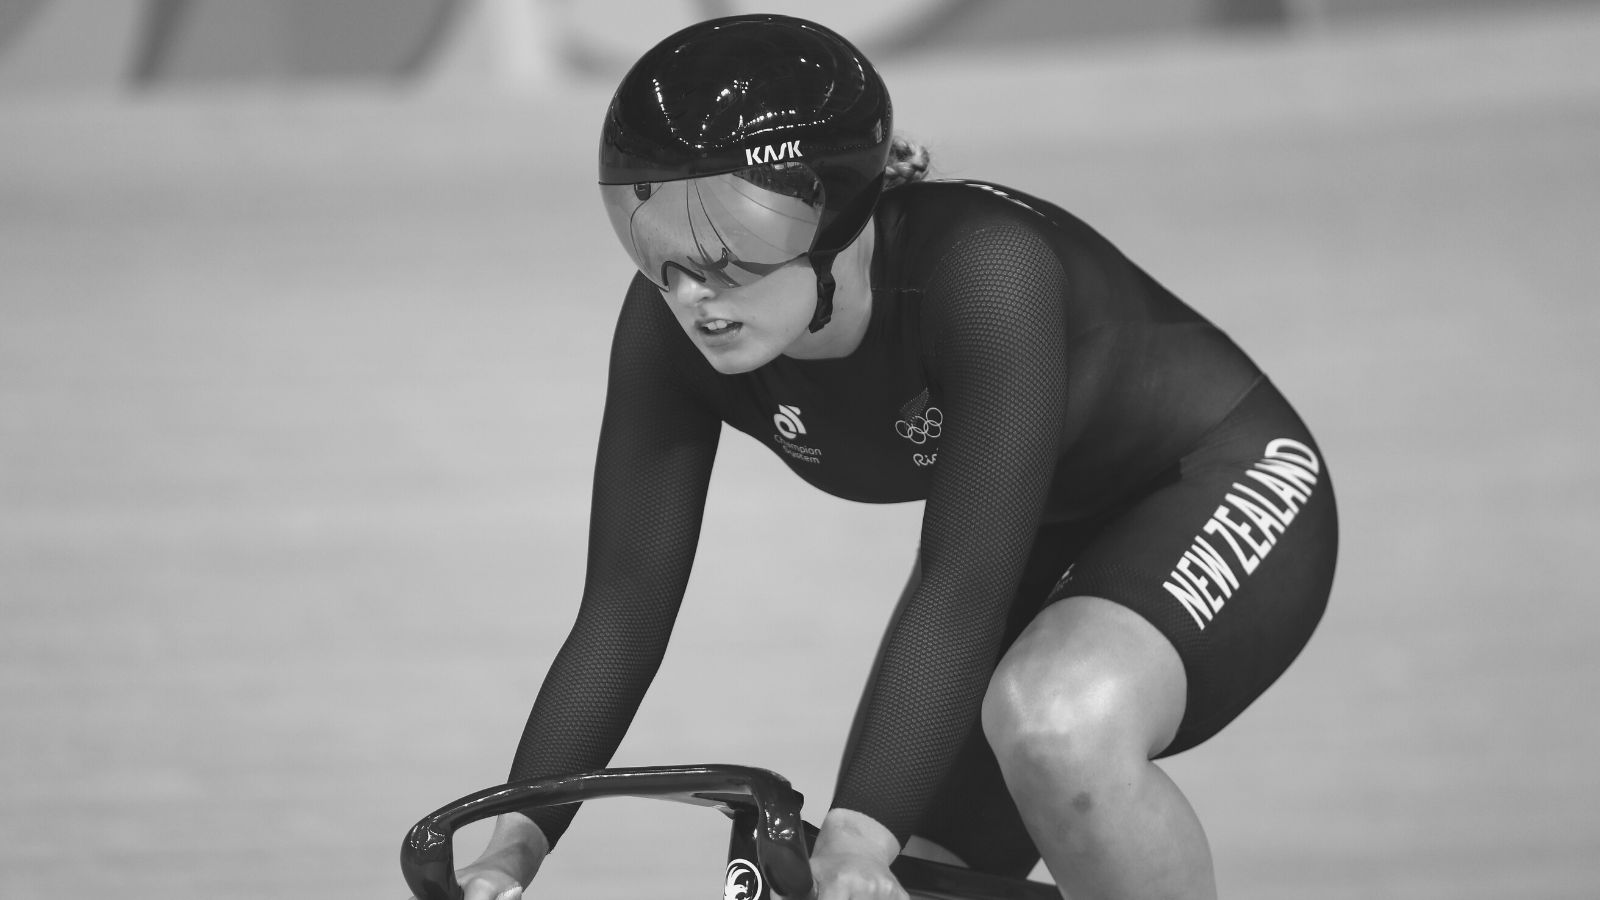 New Zealand 2016 Olympic cyclist Olivia Podmore dies at 24